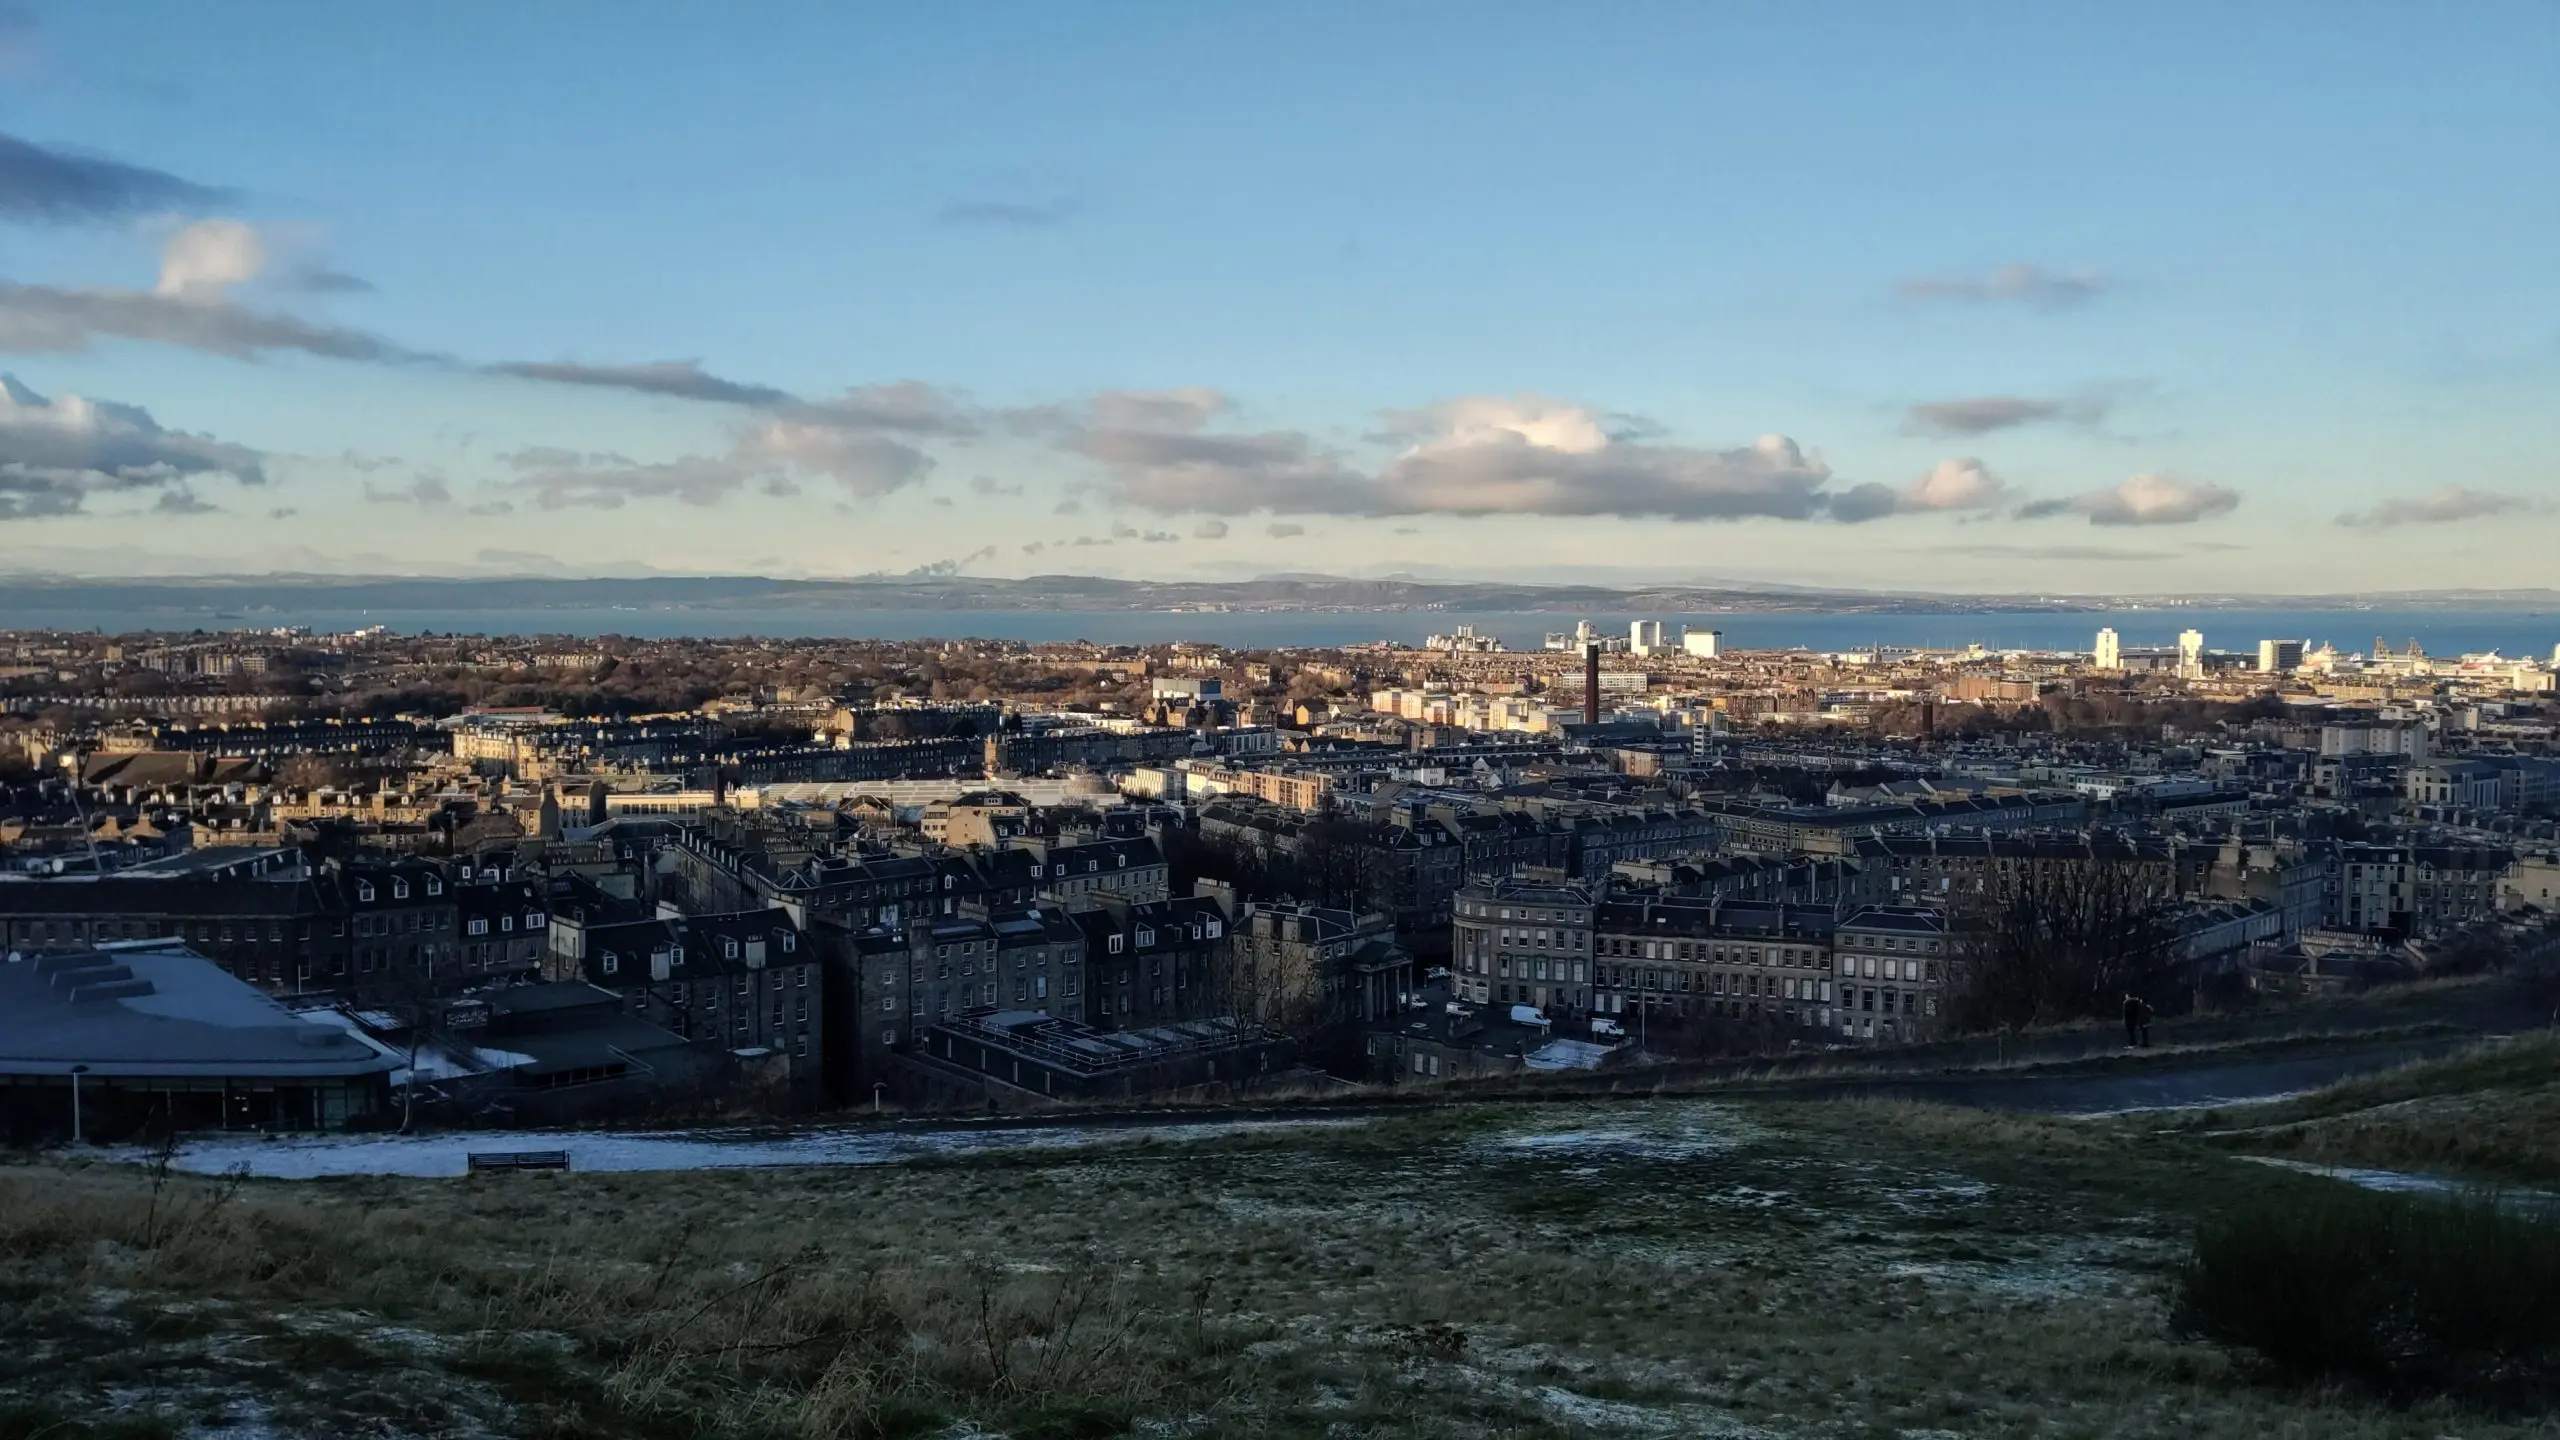 Say the words “new town”, and most people immediately picture concrete deserts and unimaginative architecture. That couldn’t be further from the truth in Edinburgh.